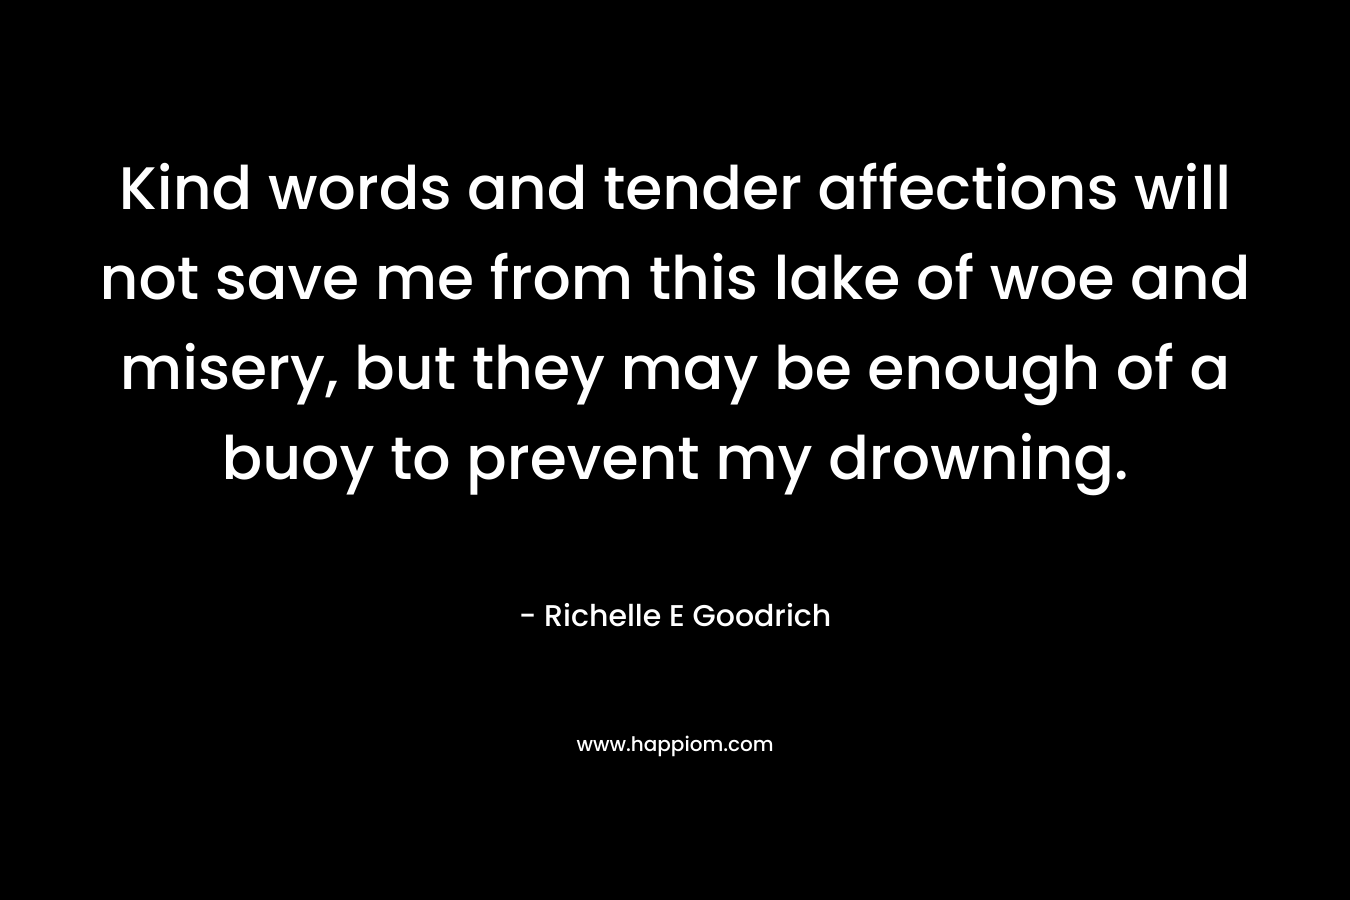 Kind words and tender affections will not save me from this lake of woe and misery, but they may be enough of a buoy to prevent my drowning. – Richelle E Goodrich